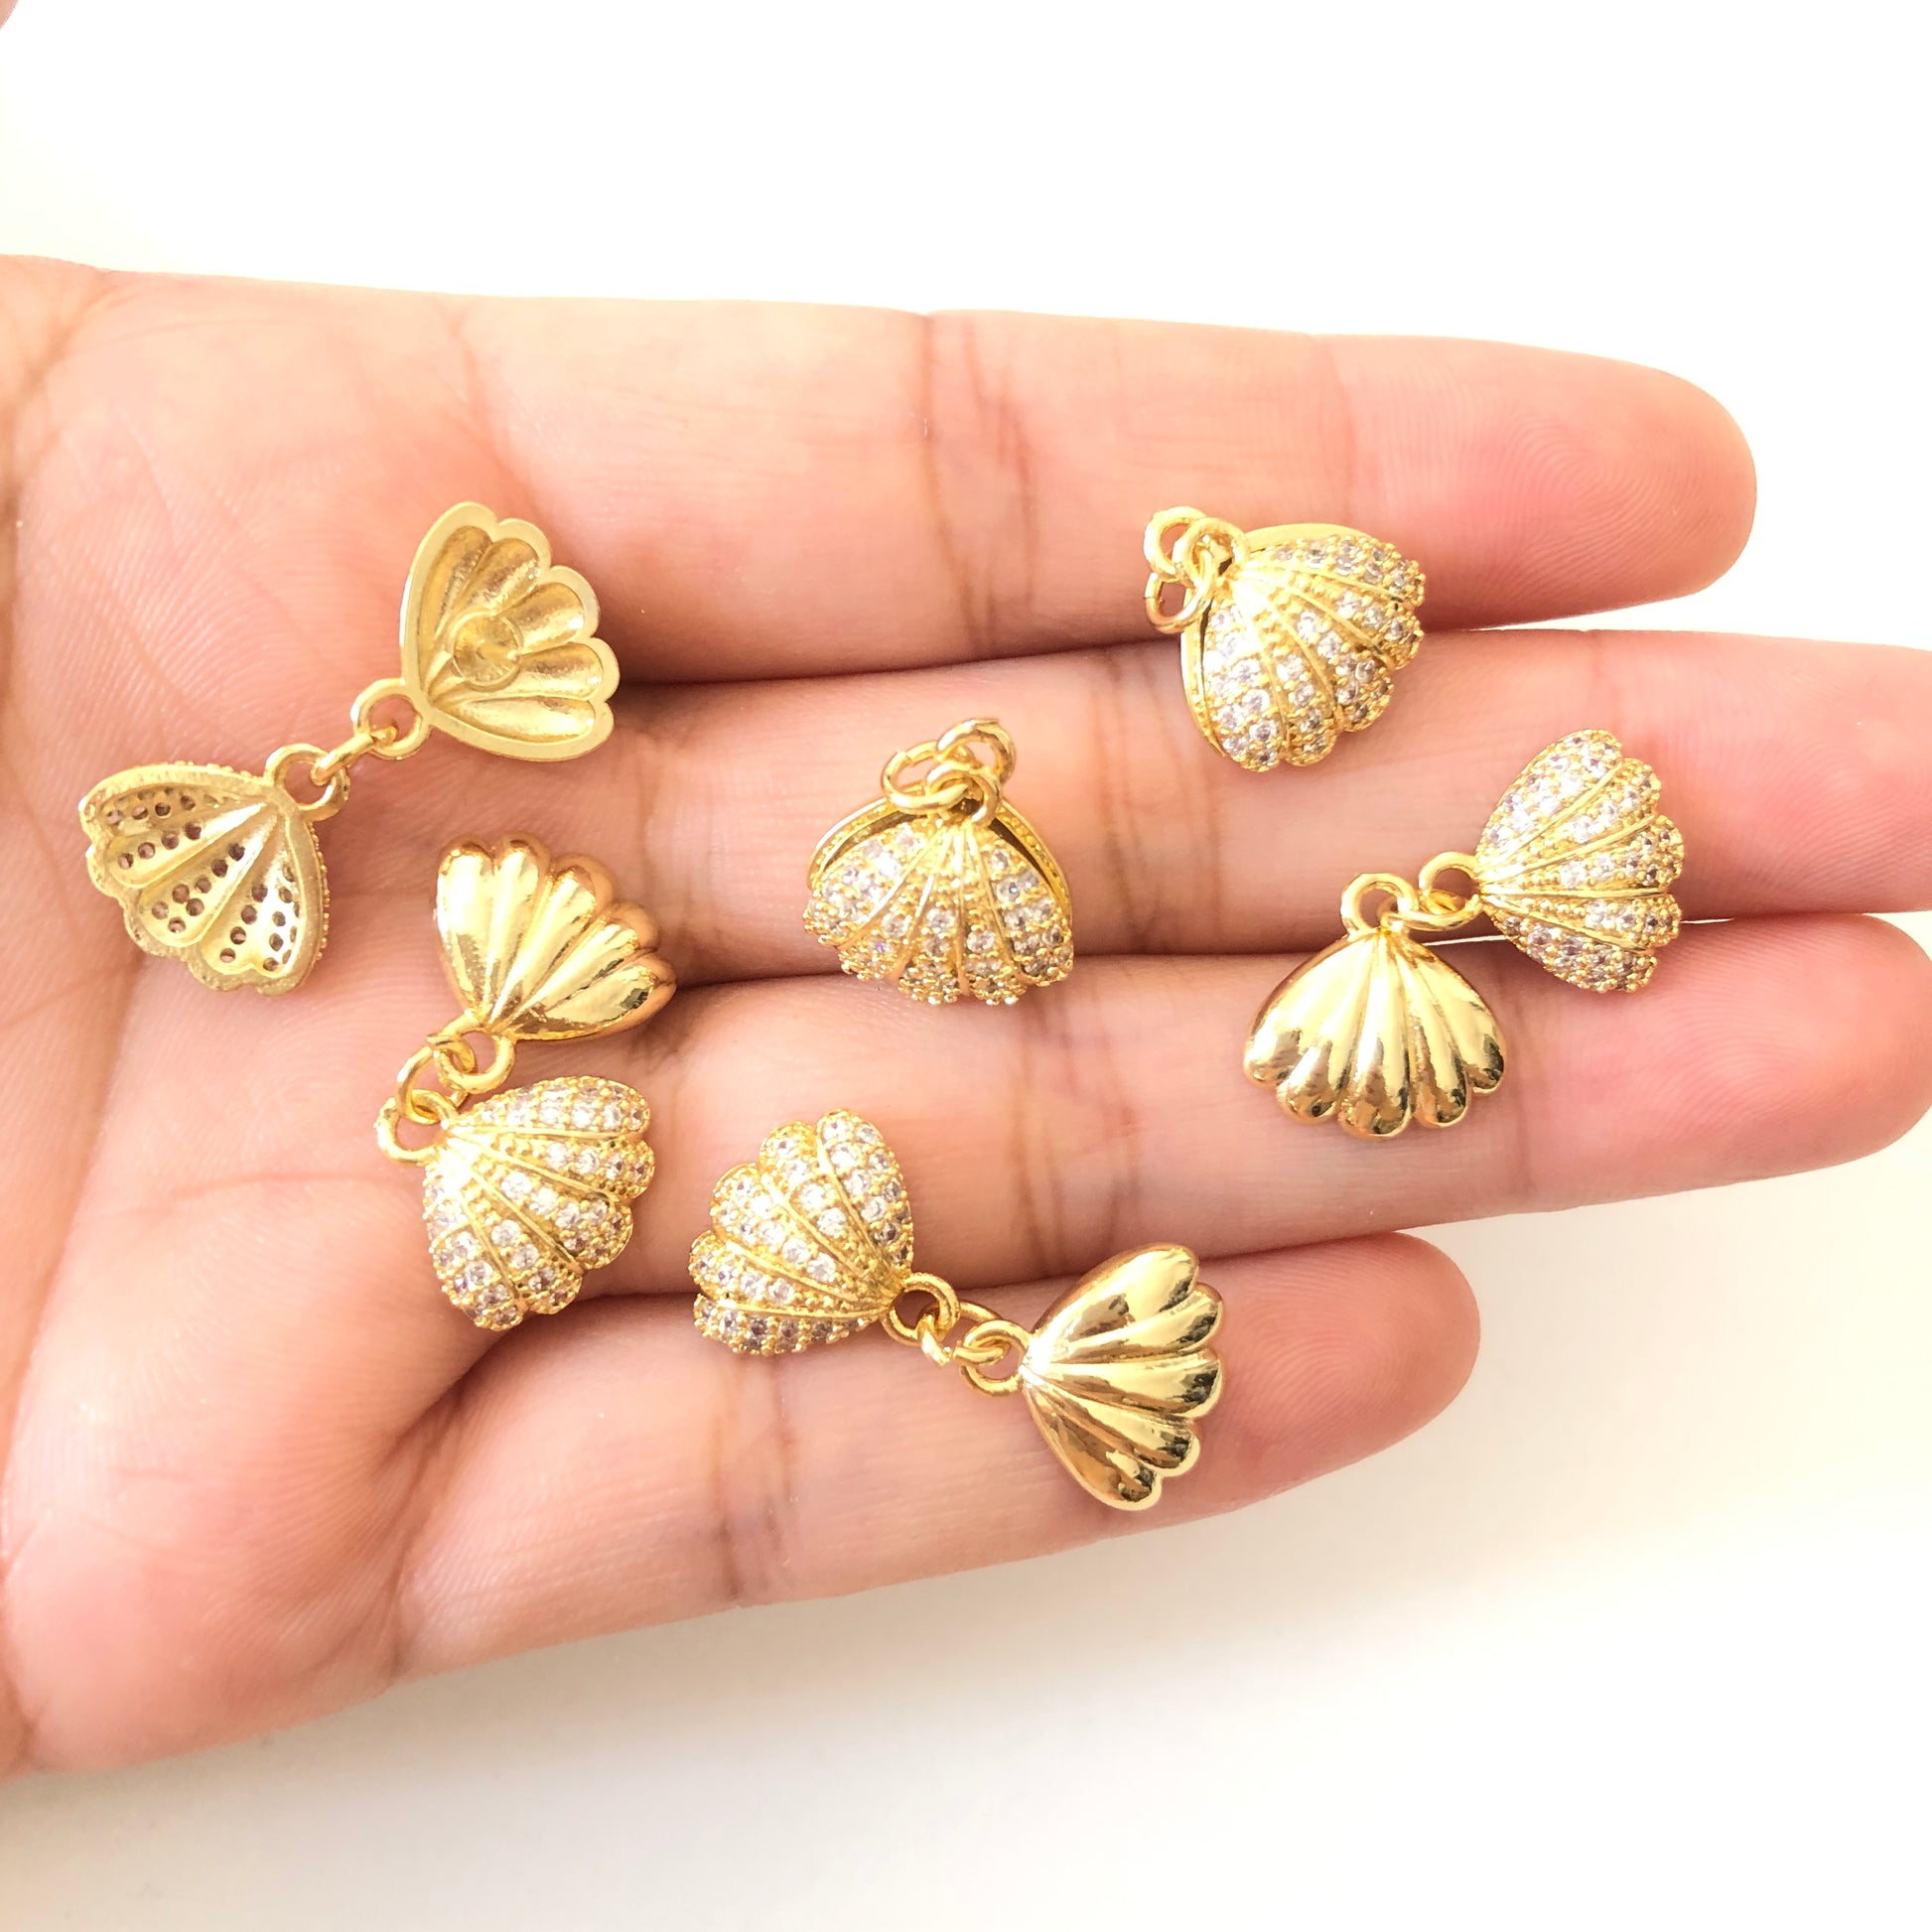 10pcs/lot 12.6*12.8mm CZ Paved Shell Charms CZ Paved Charms Small Sizes Charms Beads Beyond